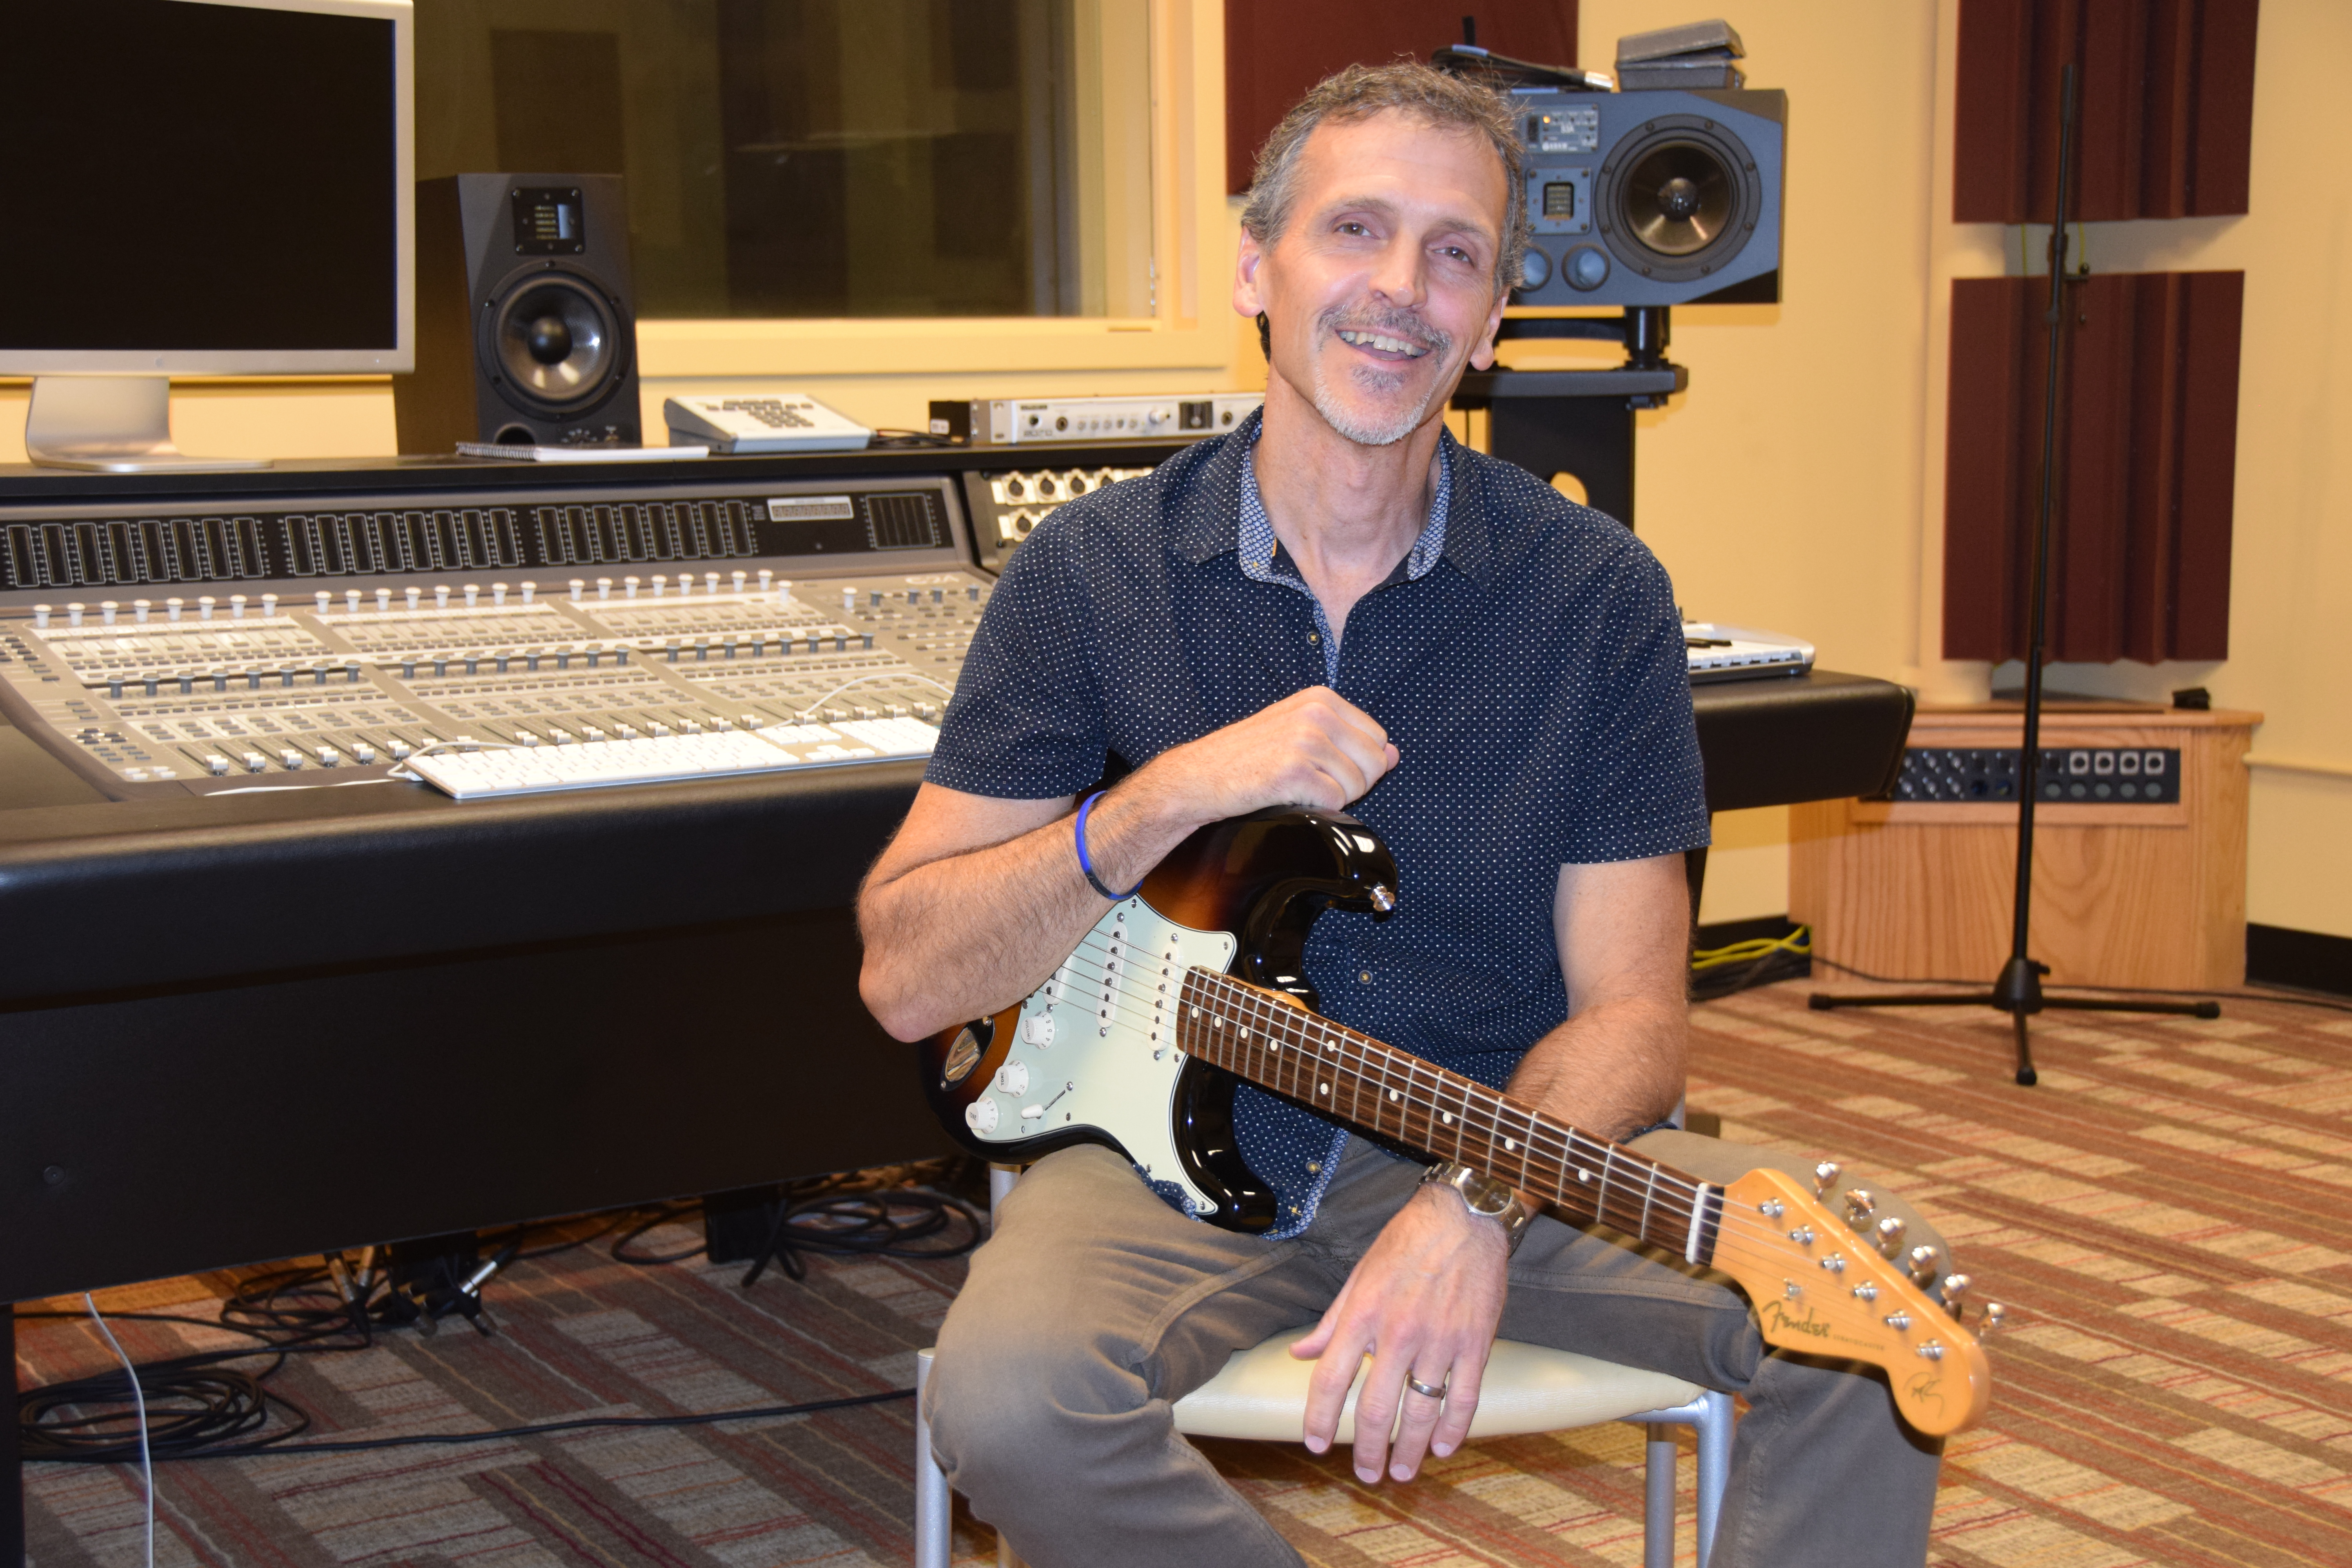 VU Associate Professor of Music Scott Mercer sits with a guitar on his lap in the John Mellencamp Audio Recording Studio at the Shircliff Humanities Center on the Vincennes Campus